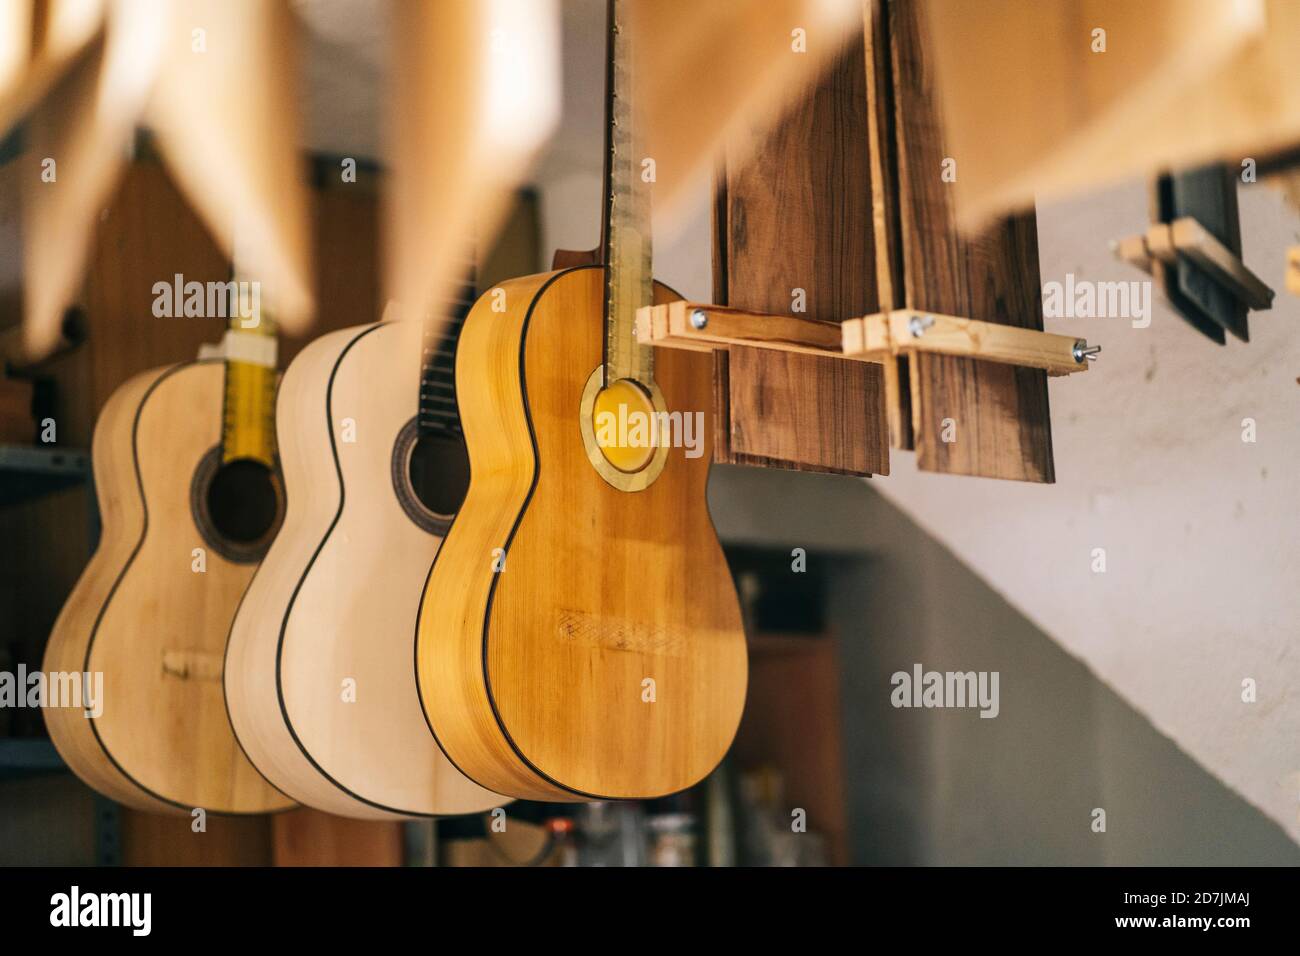 Guitars hanging in a line at workshop Stock Photo